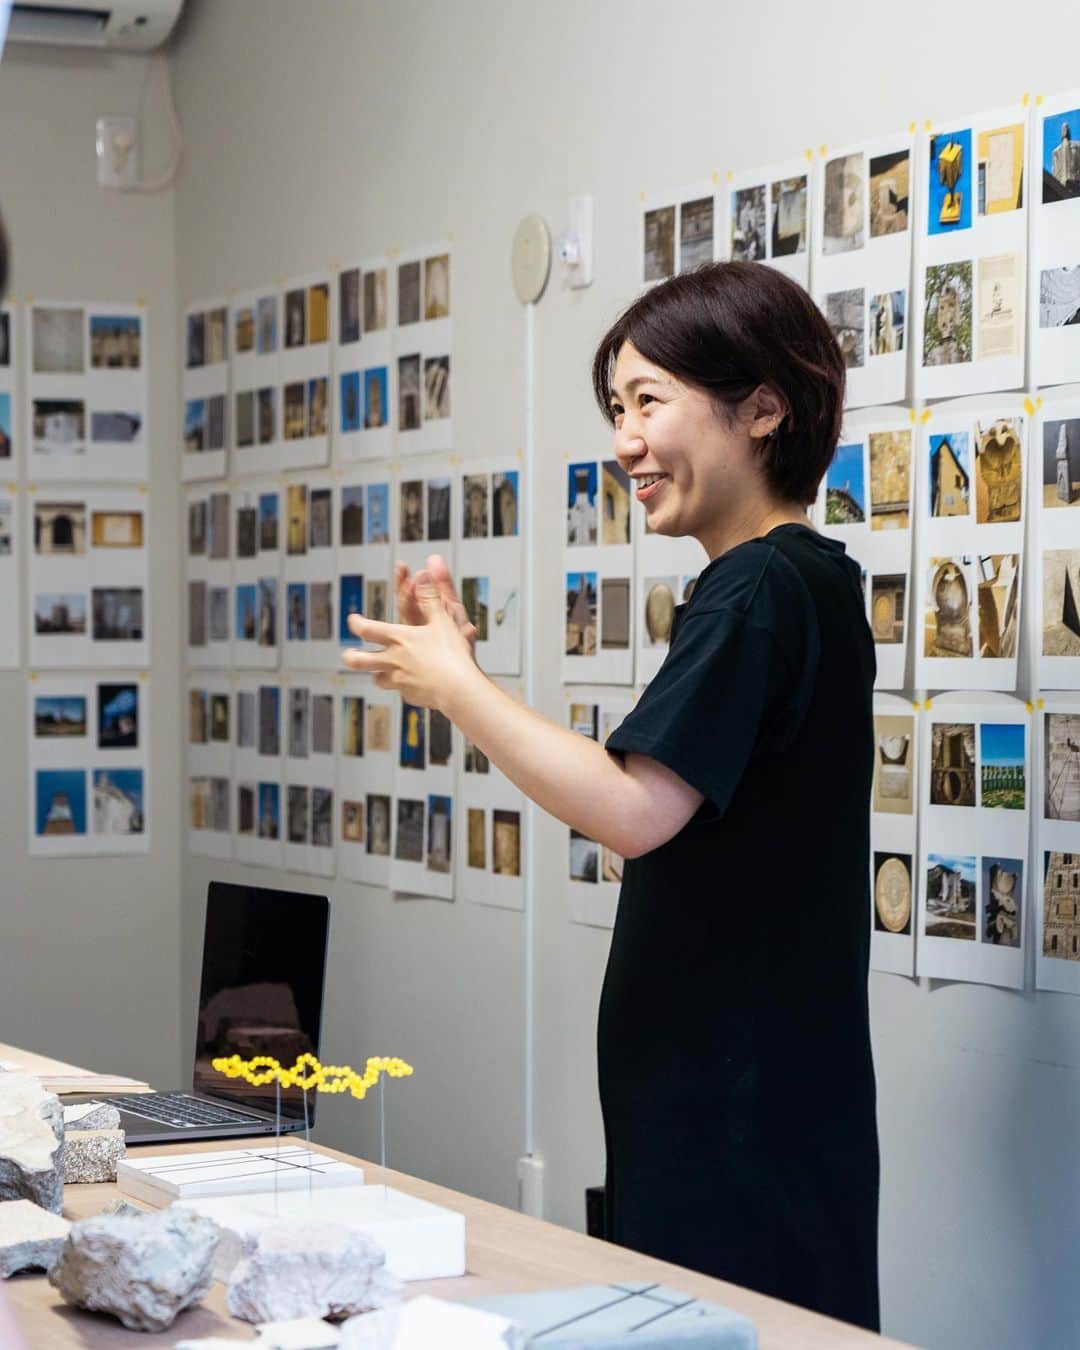 Promoting Tokyo Culture都庁文化振興部さんのインスタグラム写真 - (Promoting Tokyo Culture都庁文化振興部Instagram)「START Box Sasahatahatsu, a creative space utilising a vacant storefront in a metropolitan housing complex in the Sasazuka - Hatagaya area, opened in April. The project provides artists seeking a place to create with an easy-to-use space where new encounters can be made.  The first phase of the open atelier, which took place on June 25th, was attended by five talented artists showcasing their unique approaches. Their artworks provided a glimpse into the vibrant art scene in Tokyo.   Stay tuned for upcoming activities and unseen works by these talented individuals.  Artists in order of appearance: Kaho Hayakawa @kaho.hayakawa Yutaro Yamada @yutaro__yamada Haruka Yamada @haarukka.yamada Mai Yamamoto @glass_mai_ Yuki Oeda @oooooooedaaaaaa  -  渋谷区にある笹塚〜幡ヶ谷エリアの都営住宅の空き店舗を活用した創作活動スペース「START Box ササハタハツ」が、今年4月にオープンしました。 このプロジェクトでは、創作場所を求めるアーティストを対象に、利用しやすく新たな出会いや交流も生まれるような場を提供されています。  6月25日に行われた第一期のオープンアトリエには、様々なアプローチで創作をする5名のアーティストが参加。 作品や創作風景を通して、東京のアートの今を間近に感じられる機会となっていました。  アーティストの皆さんの今後の活躍とまだ見ぬ作品の数々に、ぜひご期待ください。  【活動アーティスト】※写真掲載順 ※敬称略 早川 佳歩　　　@kaho.hayakawa 山田 悠太郎　　@yutaro__yamada 山田 悠　　　　@haarukka.yamada 山本 麻以　　　@glass_mai_ おおえだ ゆき　@oooooooedaaaaaaa  #tokyoartsandculture  #artspace#artistinresidence  #shibuya #STARTBoxササハタハツ #ササハタハツ #渋谷 #artoftheday #fineart #artstagram #artlover #fineartphotography #art_of_japan_ #artjournal #artworld #arthistory #finearts #artworkoftheday #artandculture #artsandculture #artculture #loveofart #artexperience #culturalexperience #artlovefeed #cultureofcreatives #creativeart #exhibitionview #artexhibition #exhibitions」7月7日 22時28分 - tokyoartsandculture